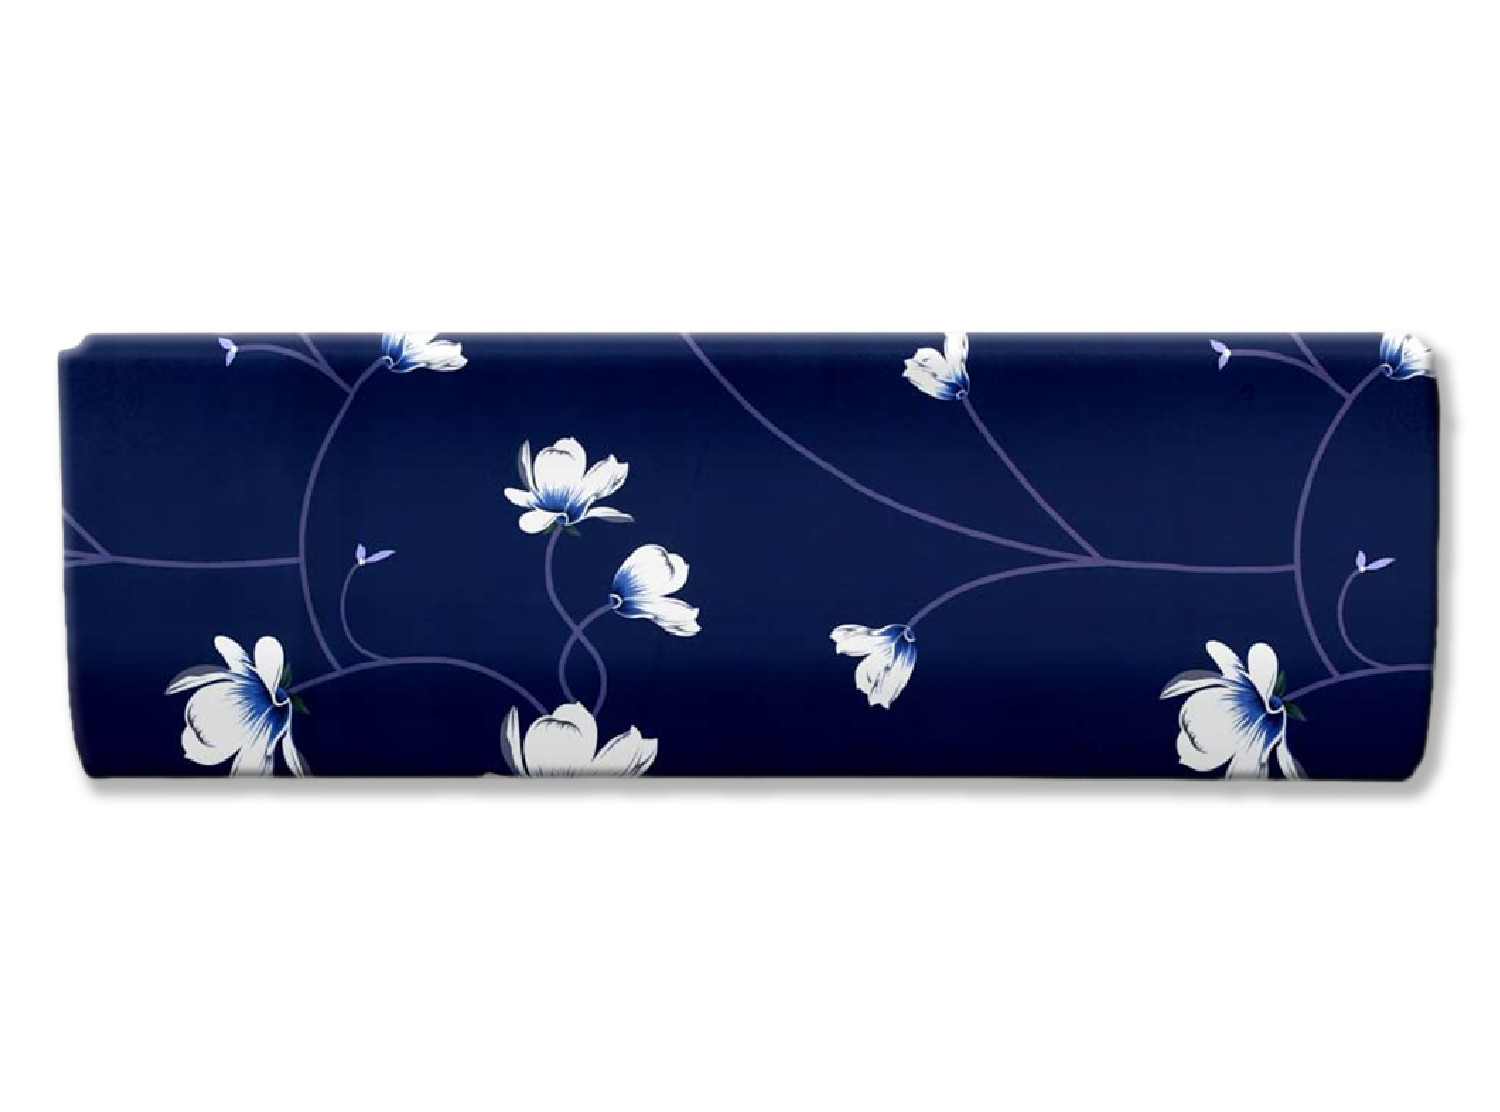 Kuber Industries AC Cover|Attractive Floral Print 1.5 Ton|All Weather Friendly|Stretchable Fabric & Elastic Closure, (Navy Blue)